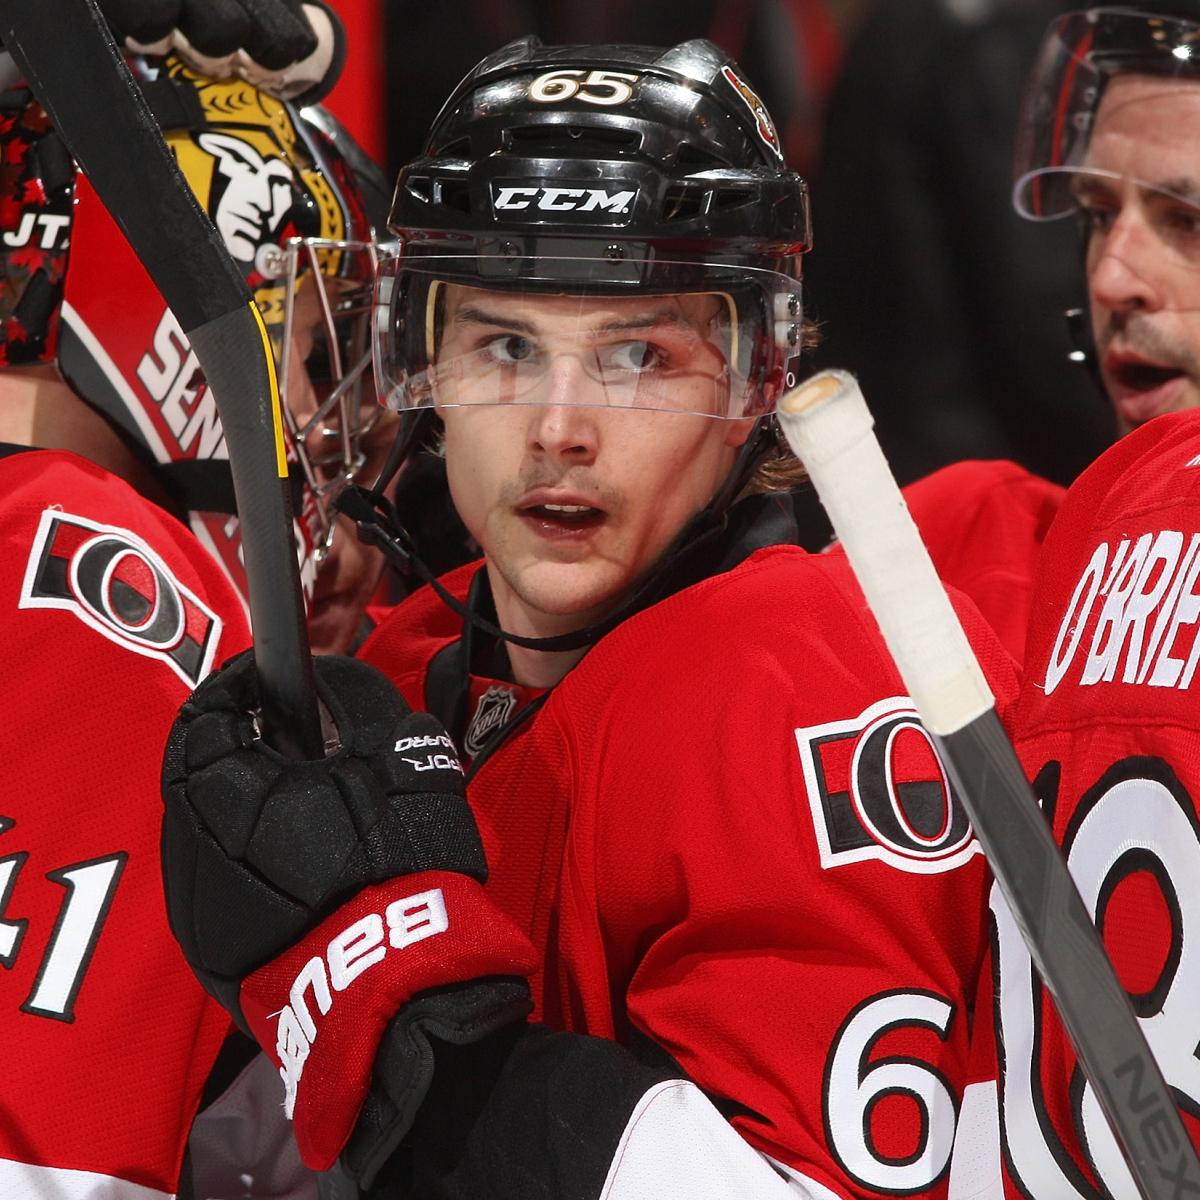 Senators vs. Maple Leafs Preview The 10 Best NHL'ers Playing in